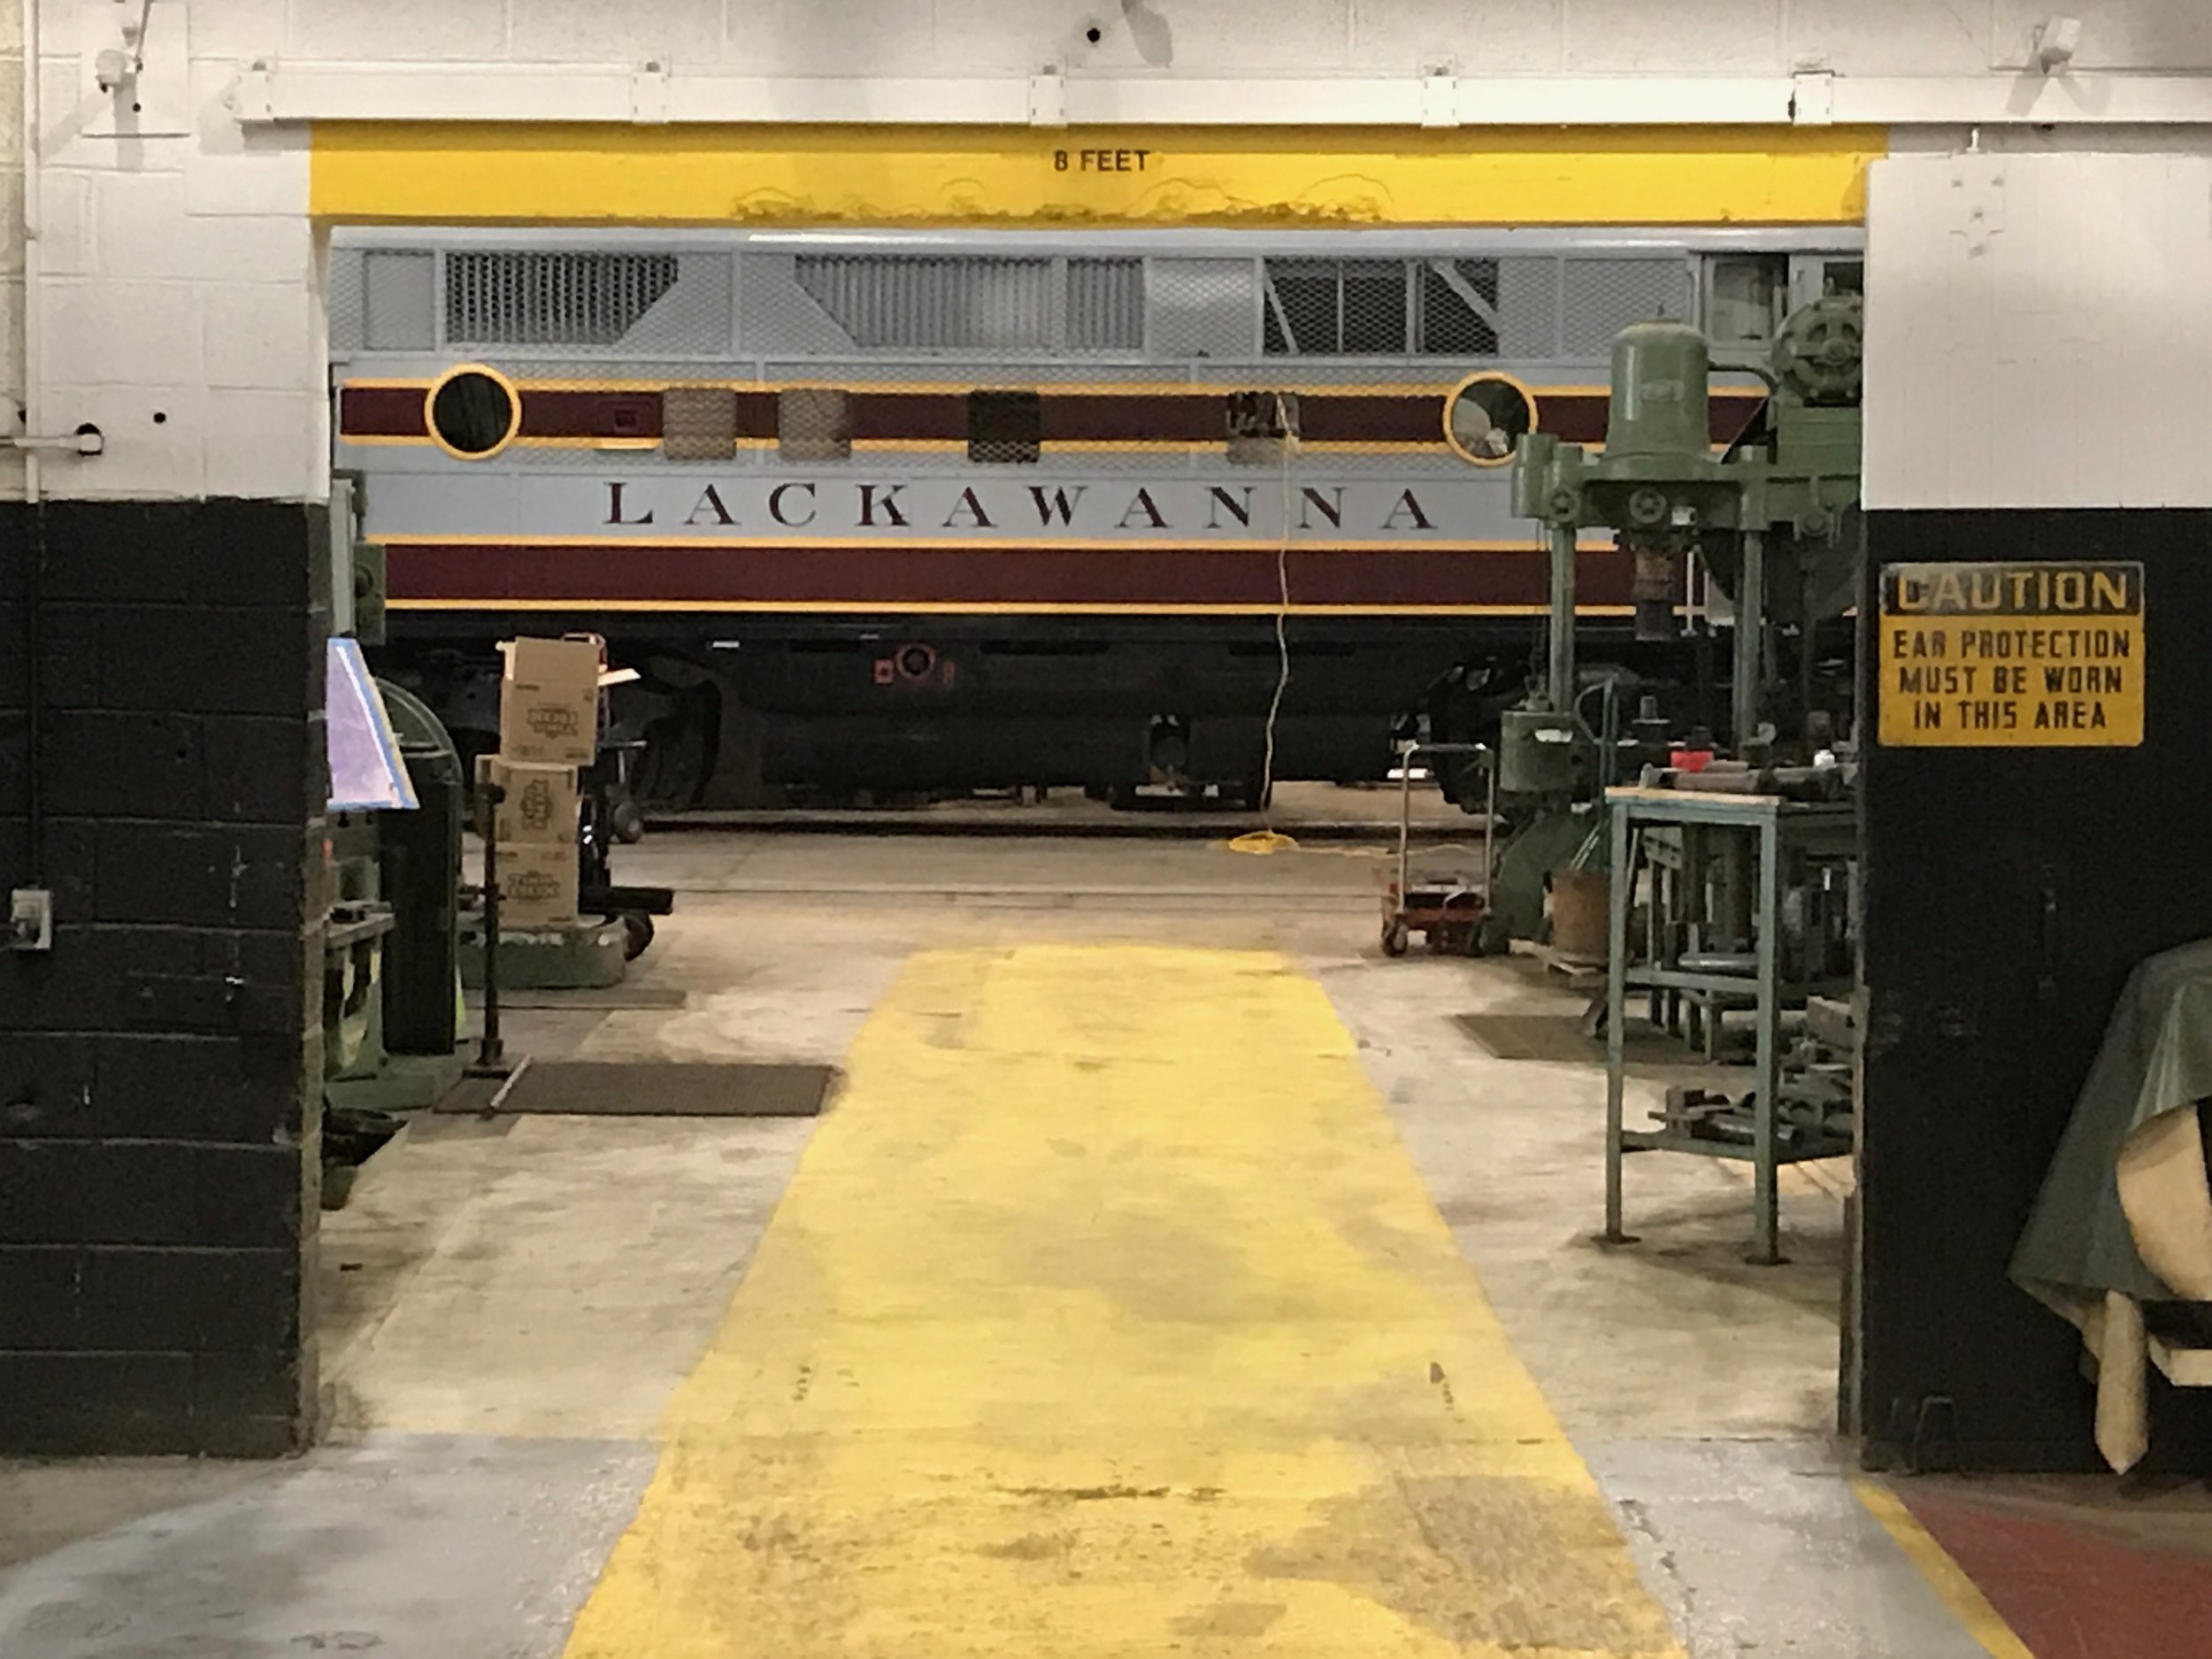  663 shown in Scranton Shops, a facility purpose-built for working on this type of locomotive. 